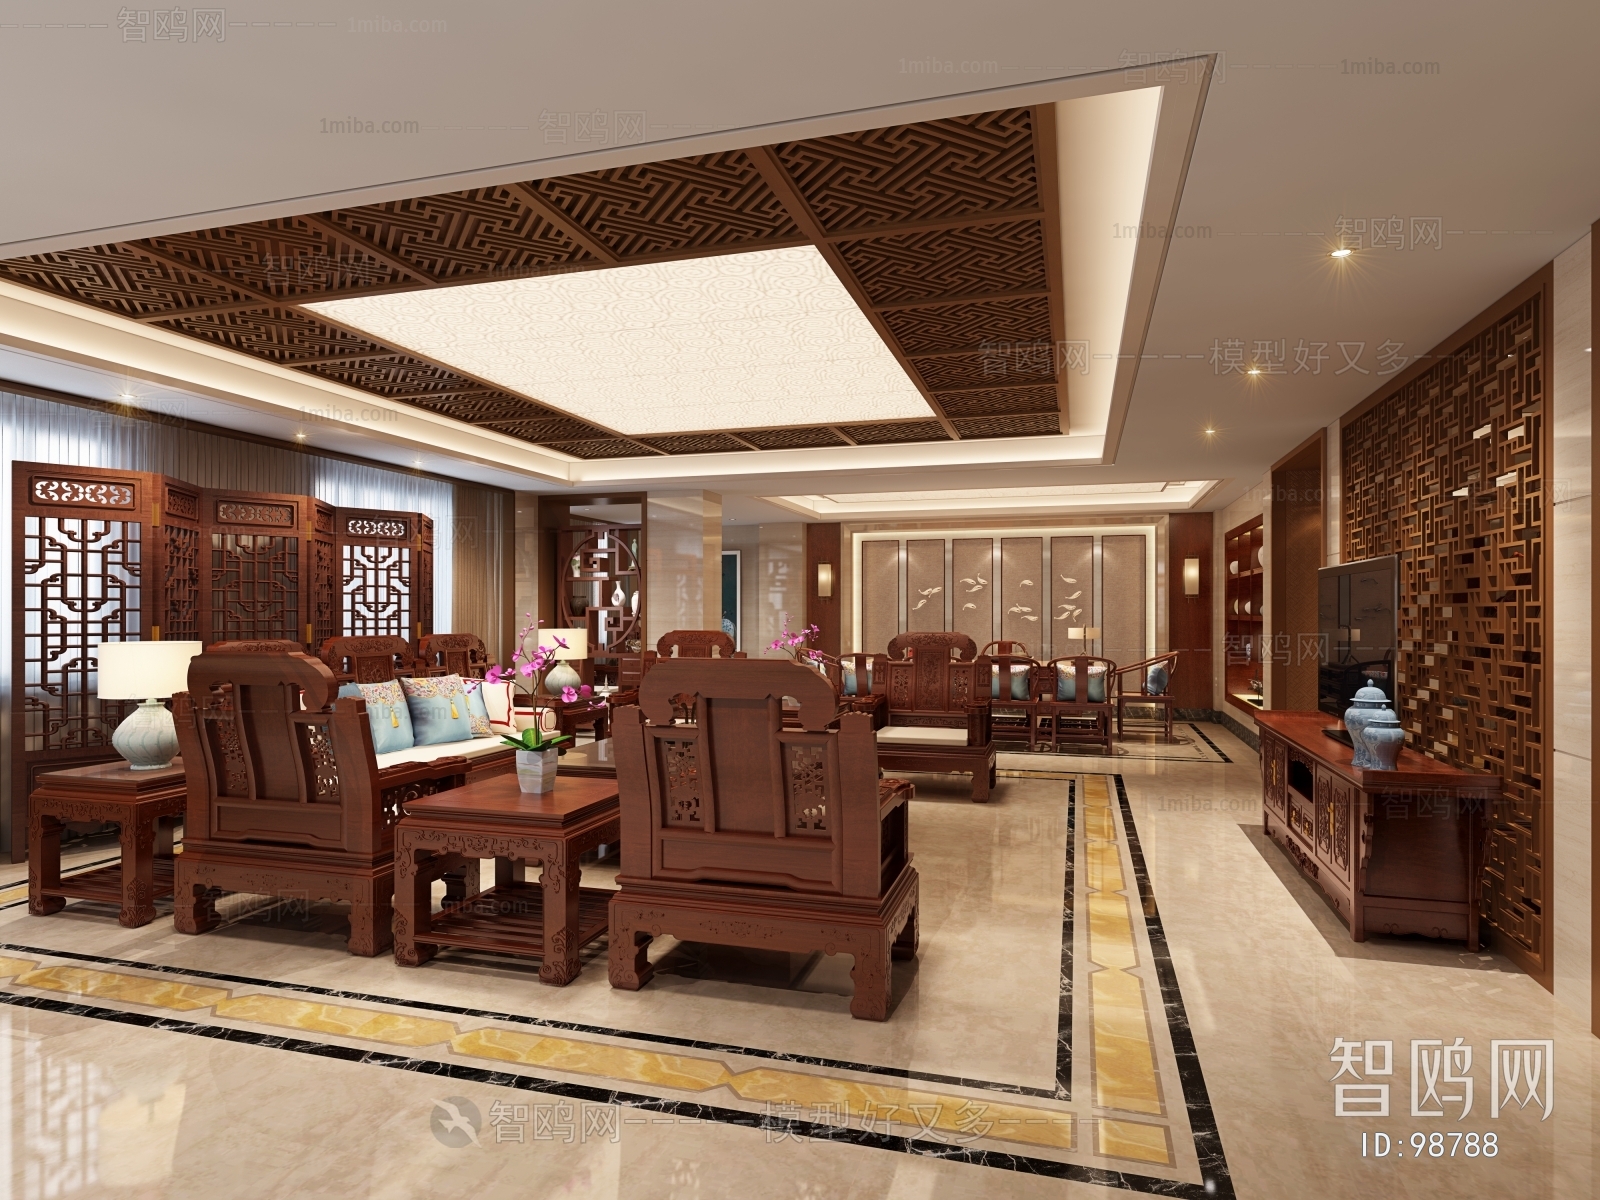 Chinese Style Meeting Room